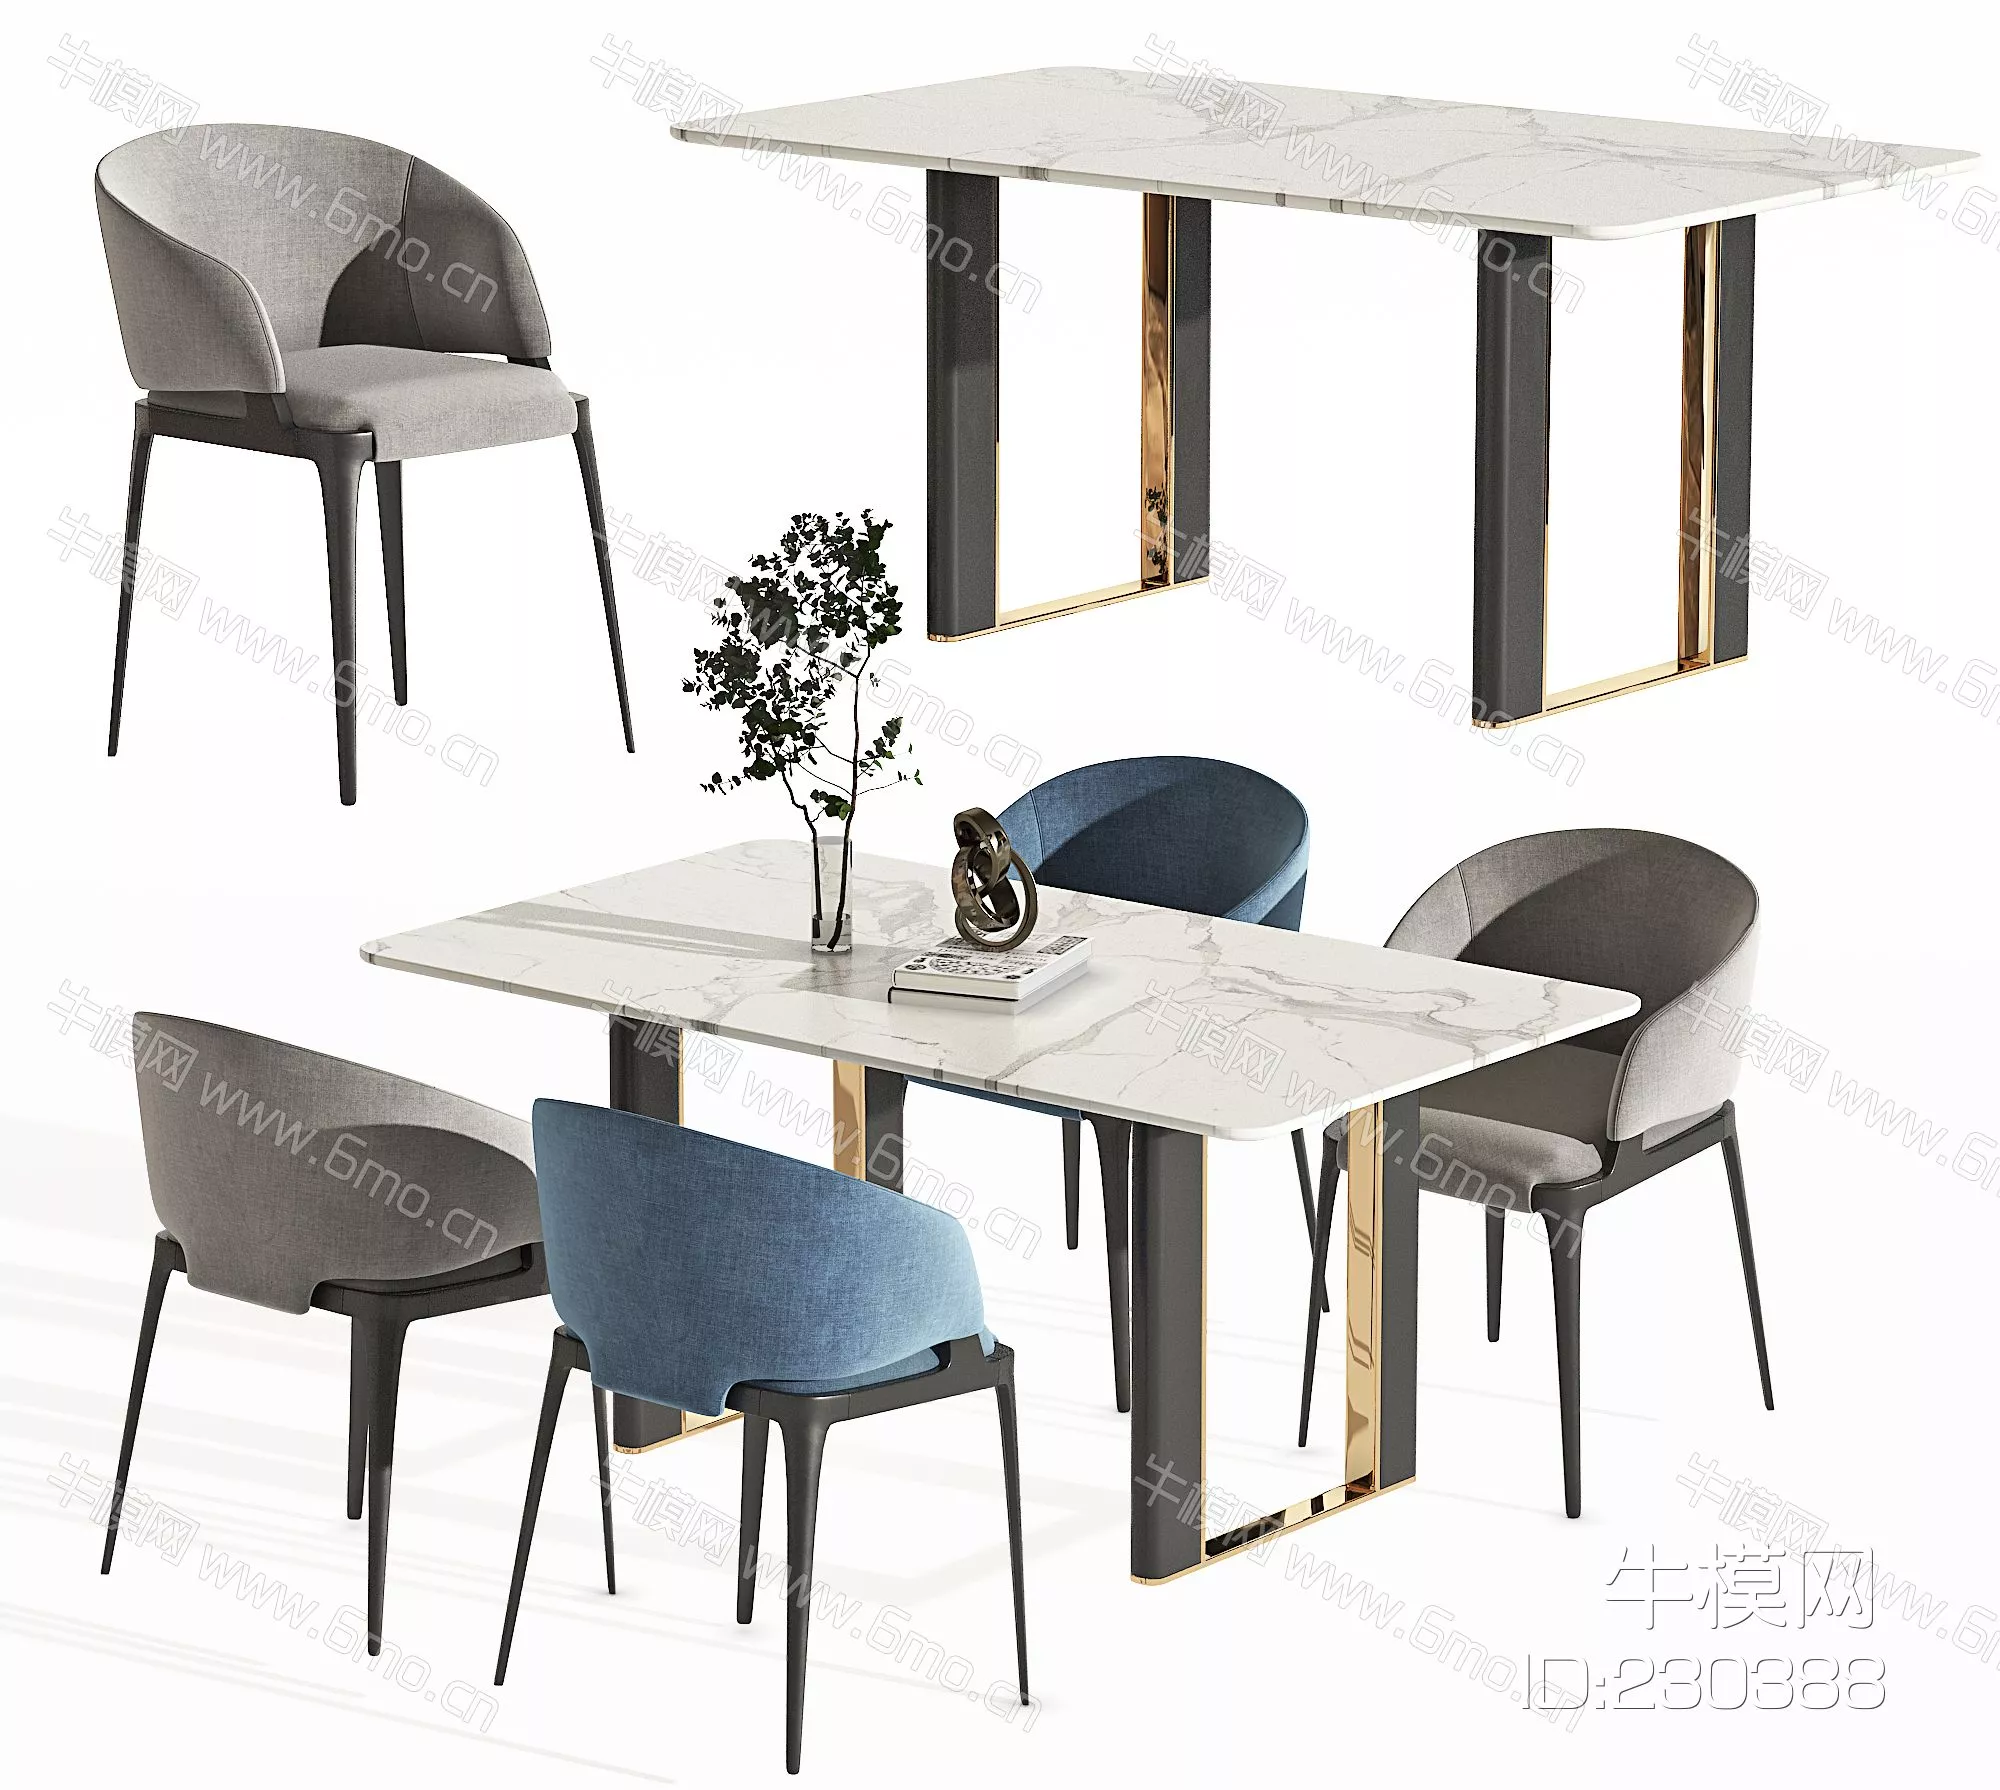 CHINESE DINING TABLE SET - SKETCHUP 3D MODEL - VRAY - 230388